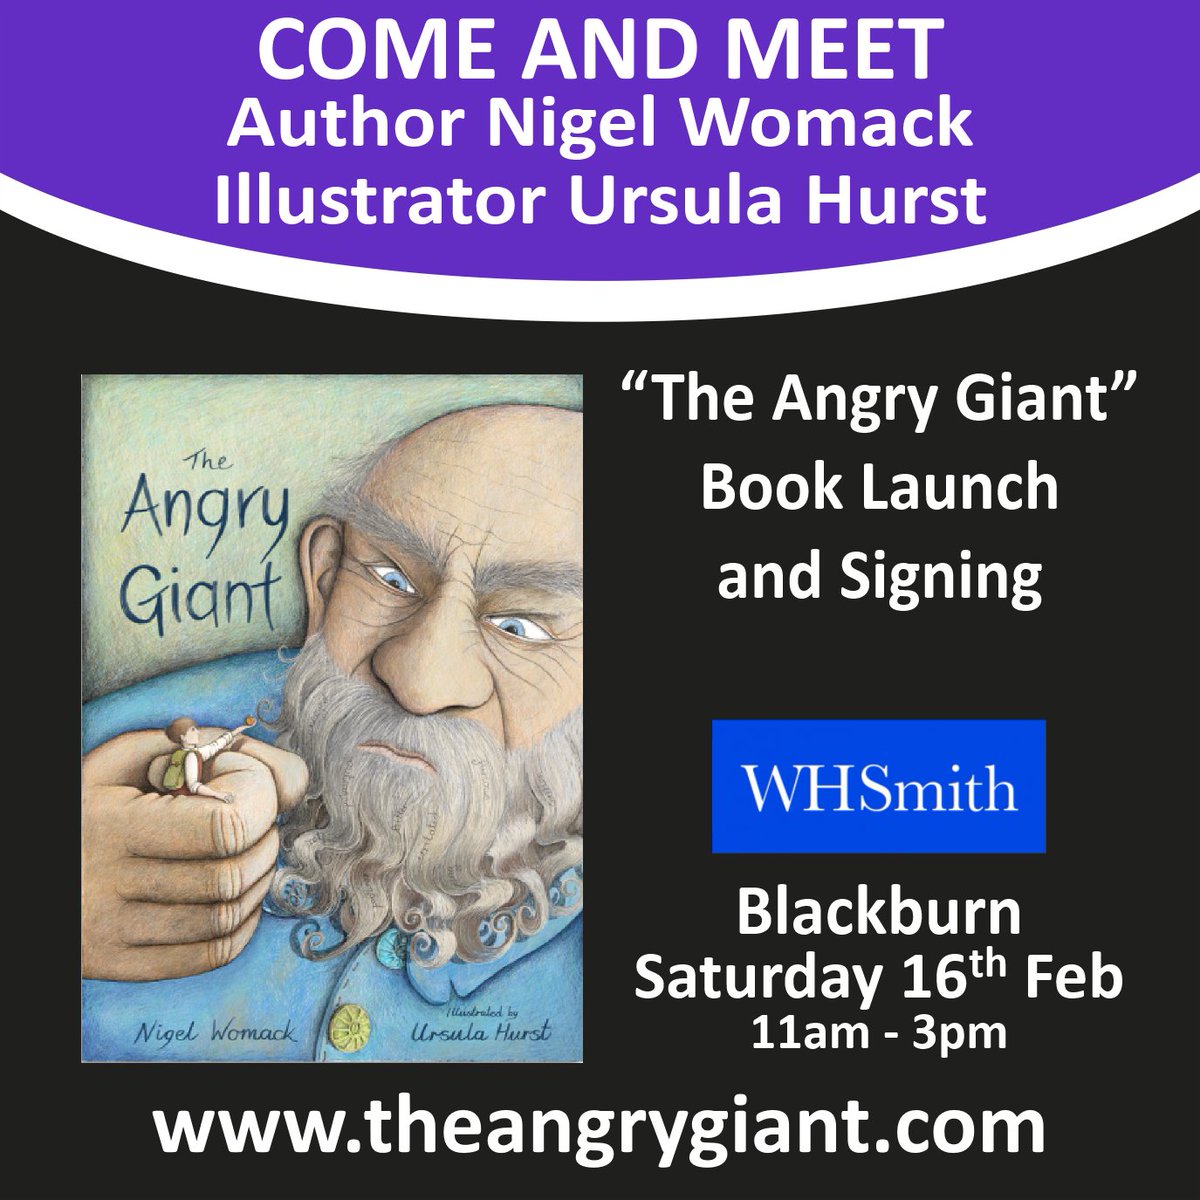 Don't forget to come along to @WHSmith #Blackburn tomorrow, 16th Feb from 11.00. Nigel Womack & @UrsulaHurstArt will be signing their debut #ChildrensBook The #AngryGiant @VisitBlackburn #Blackburn #Lancashire